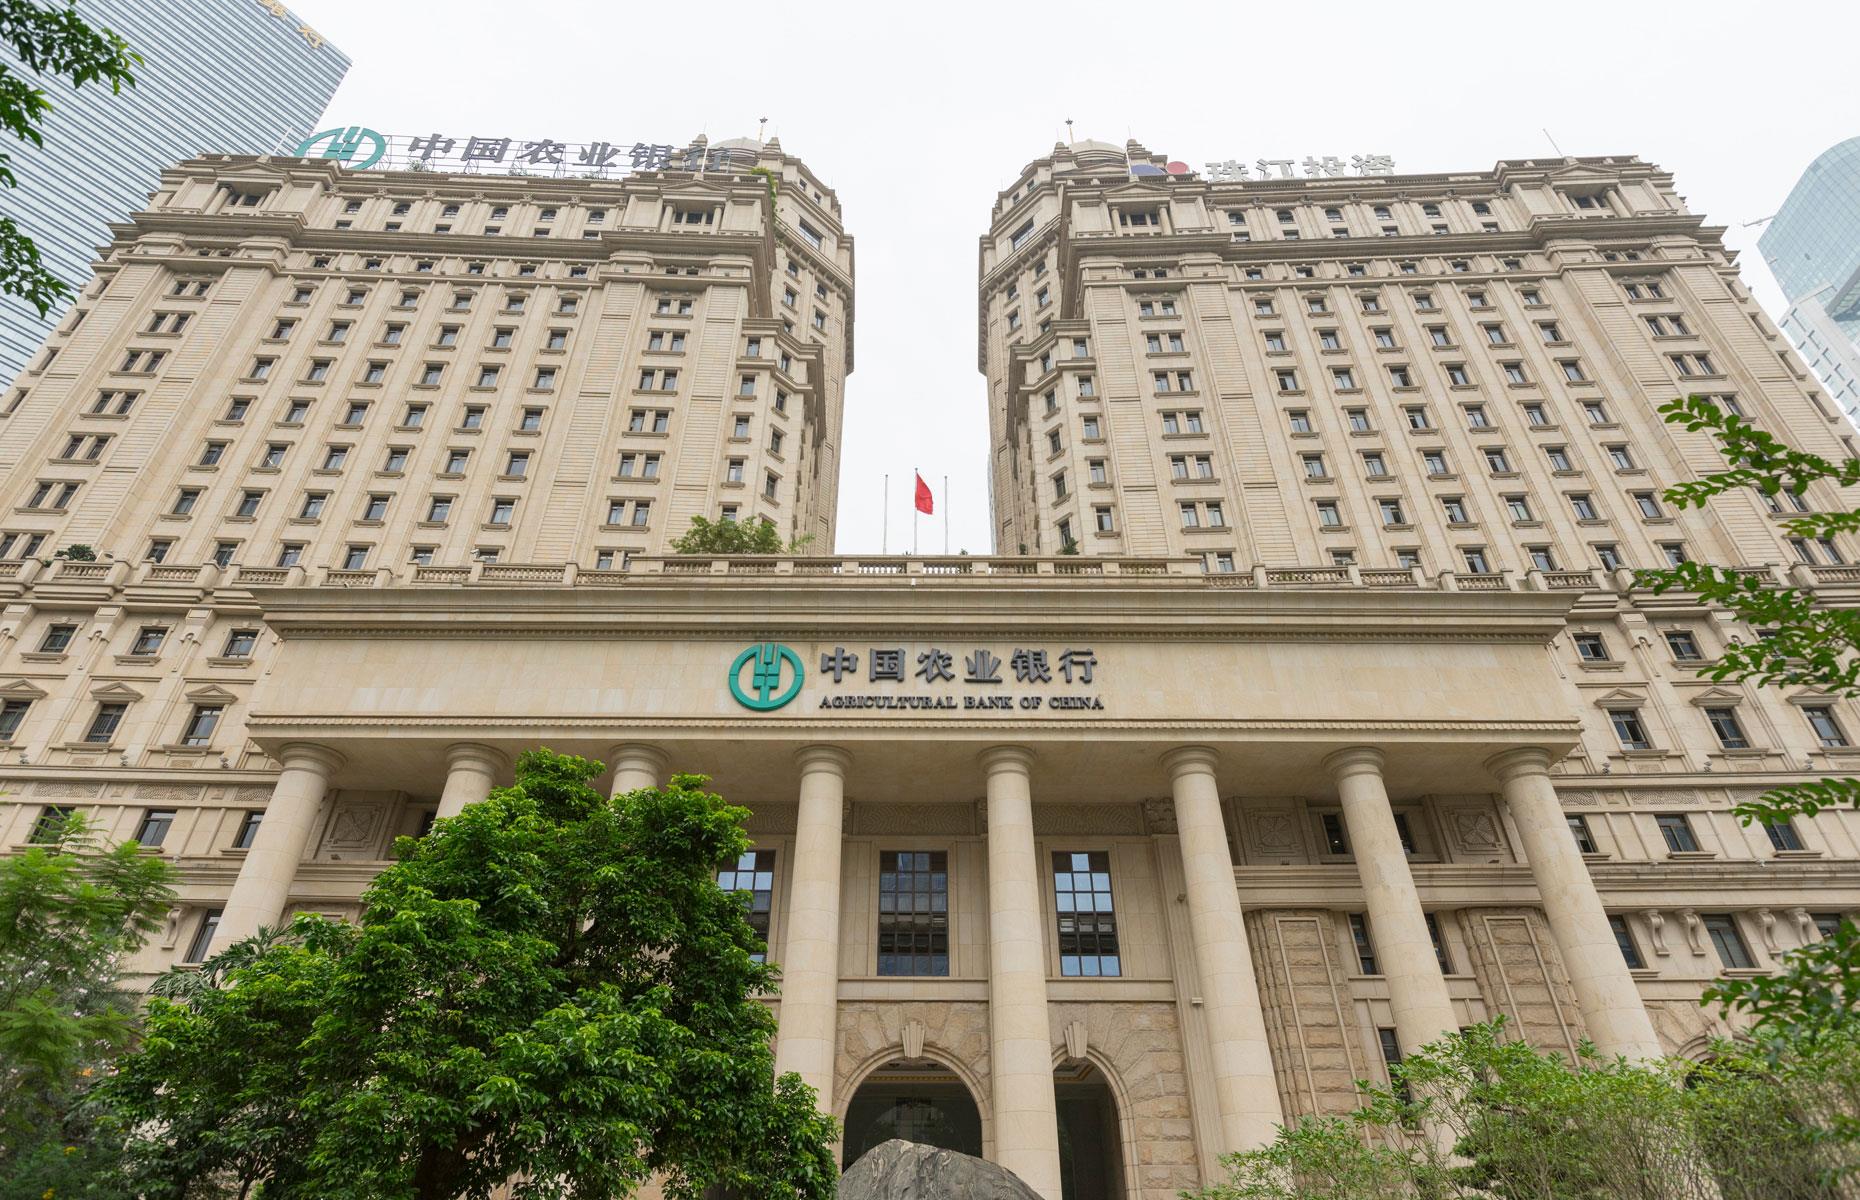 Agricultural Bank of China, annual revenue: $139.5 billion (£113.2bn)